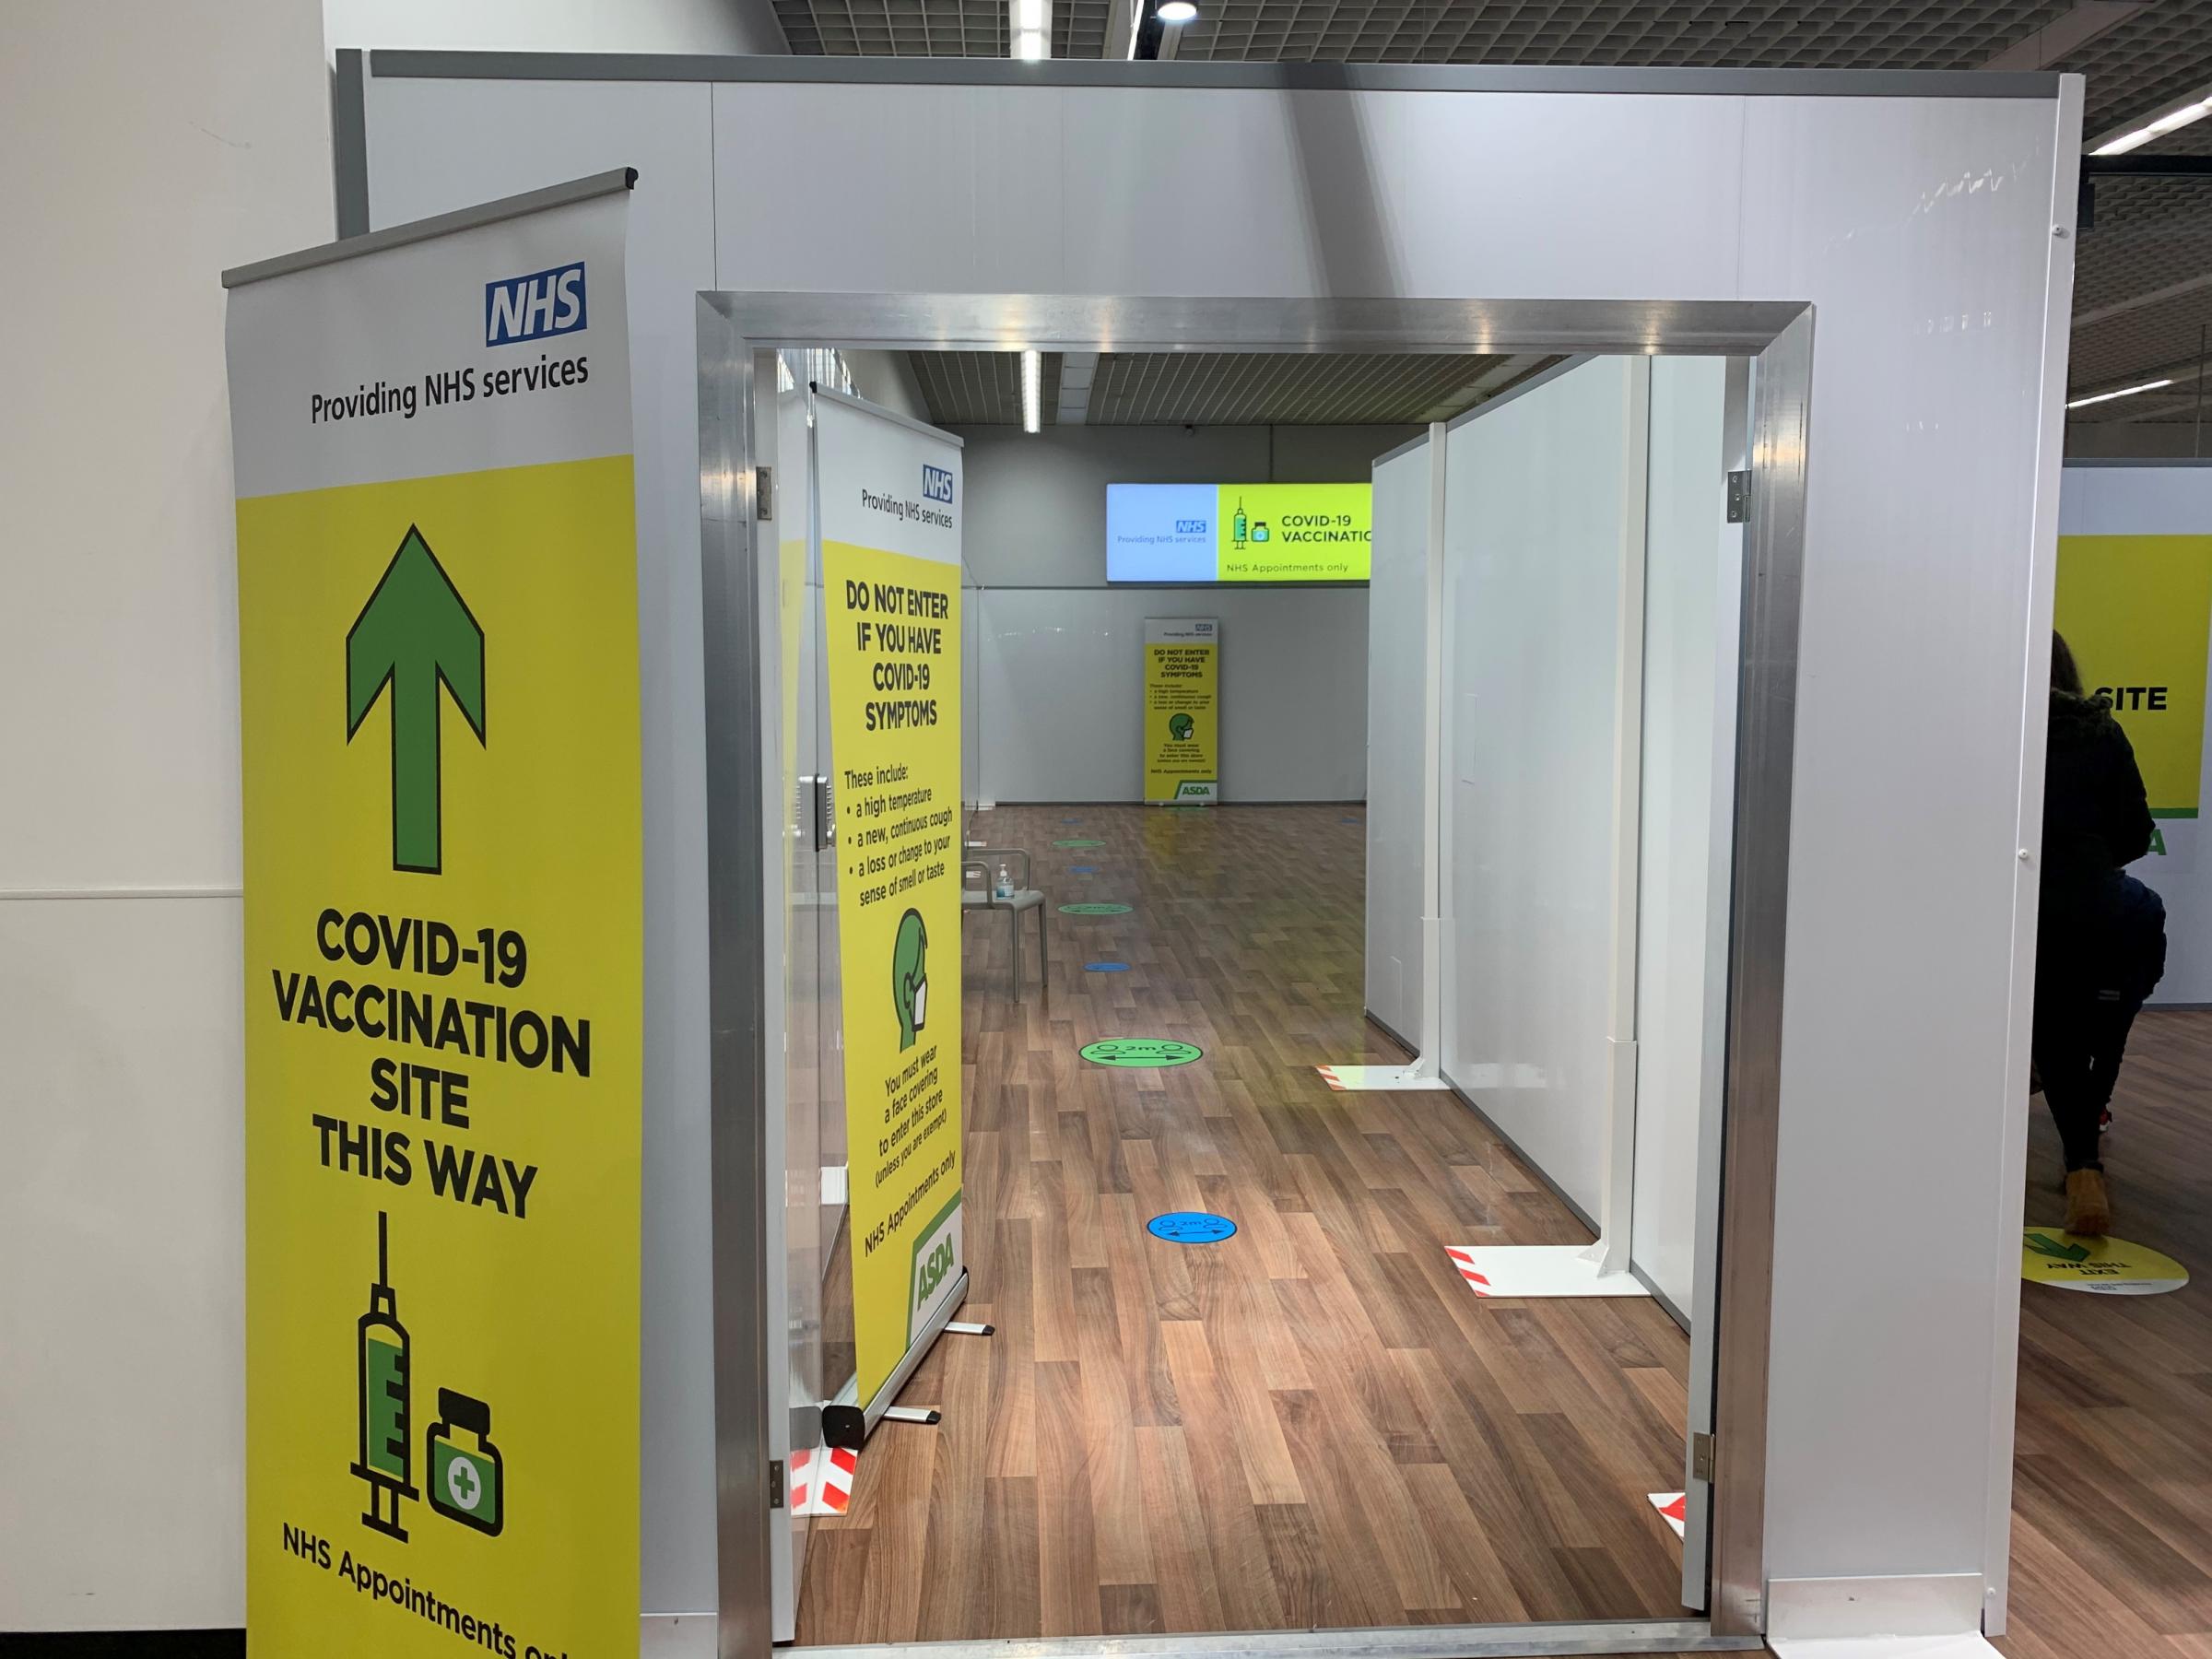 The entrance to the Covid vaccination centre inside Asda Watford. Credit: PA